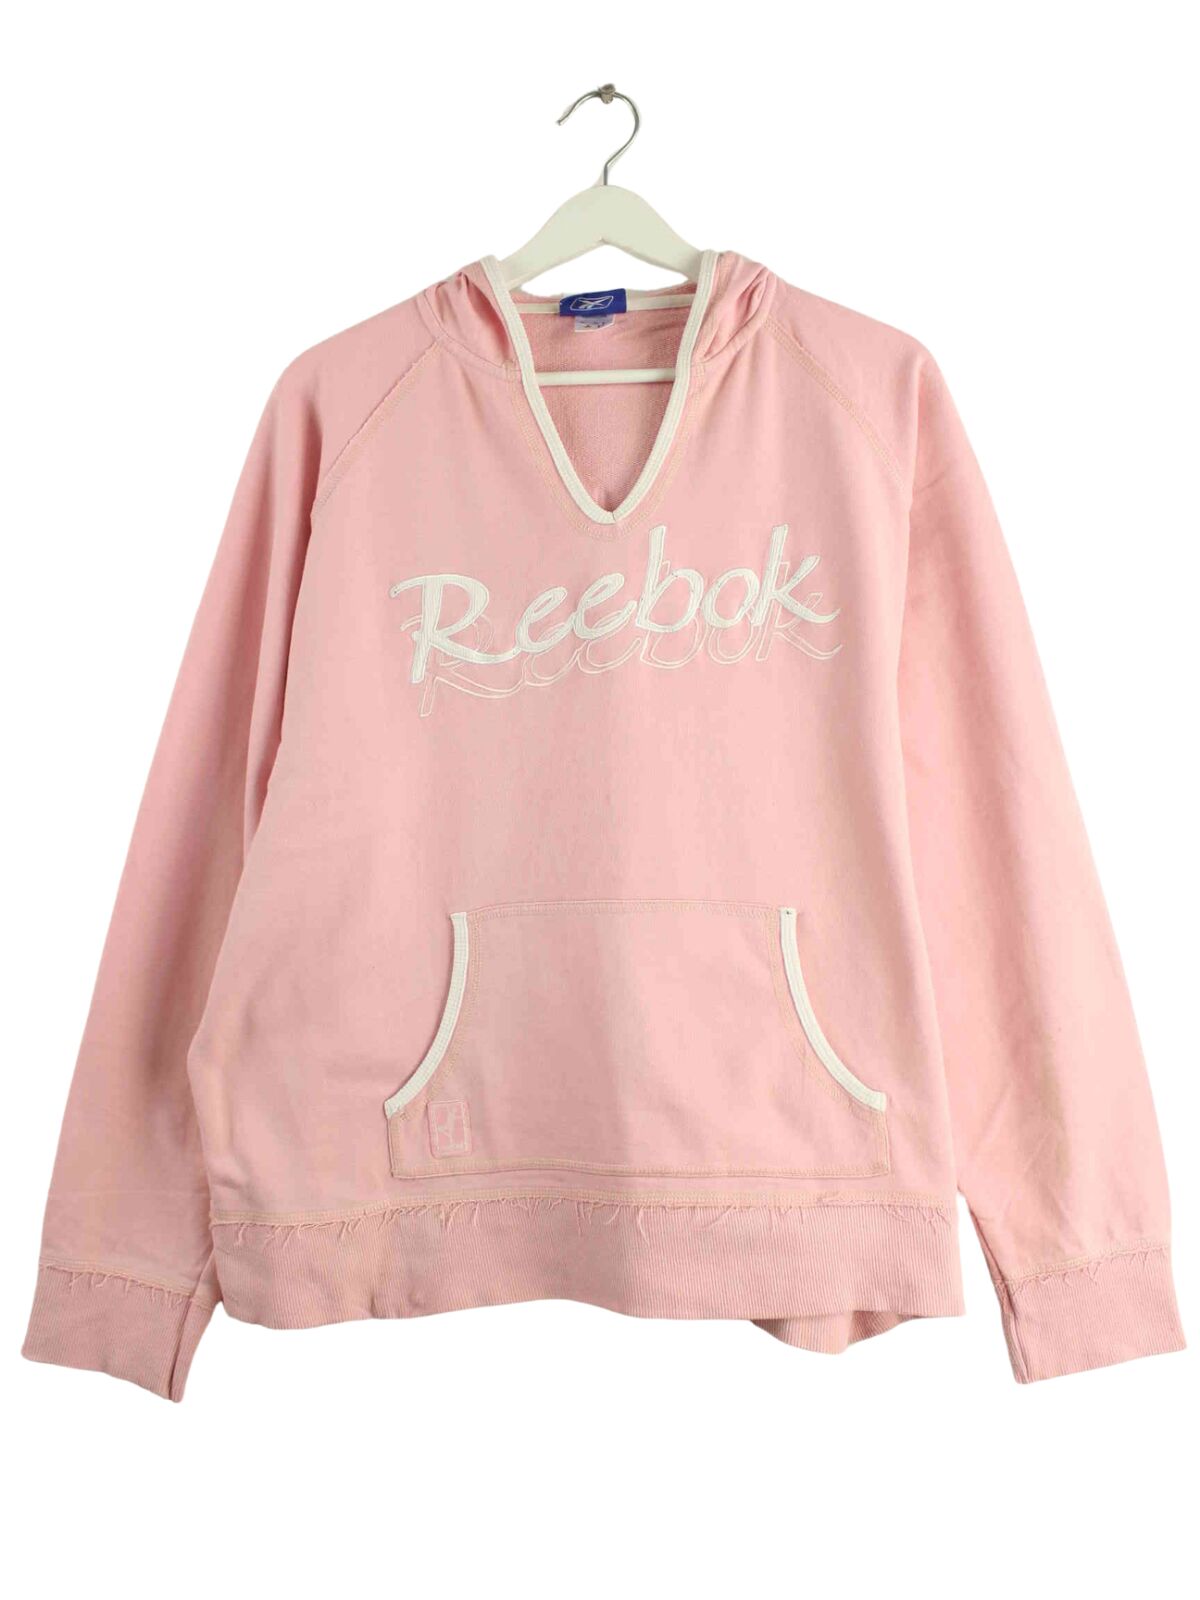 Reebok Damen Embroidered Hoodie Rosa L (front image)